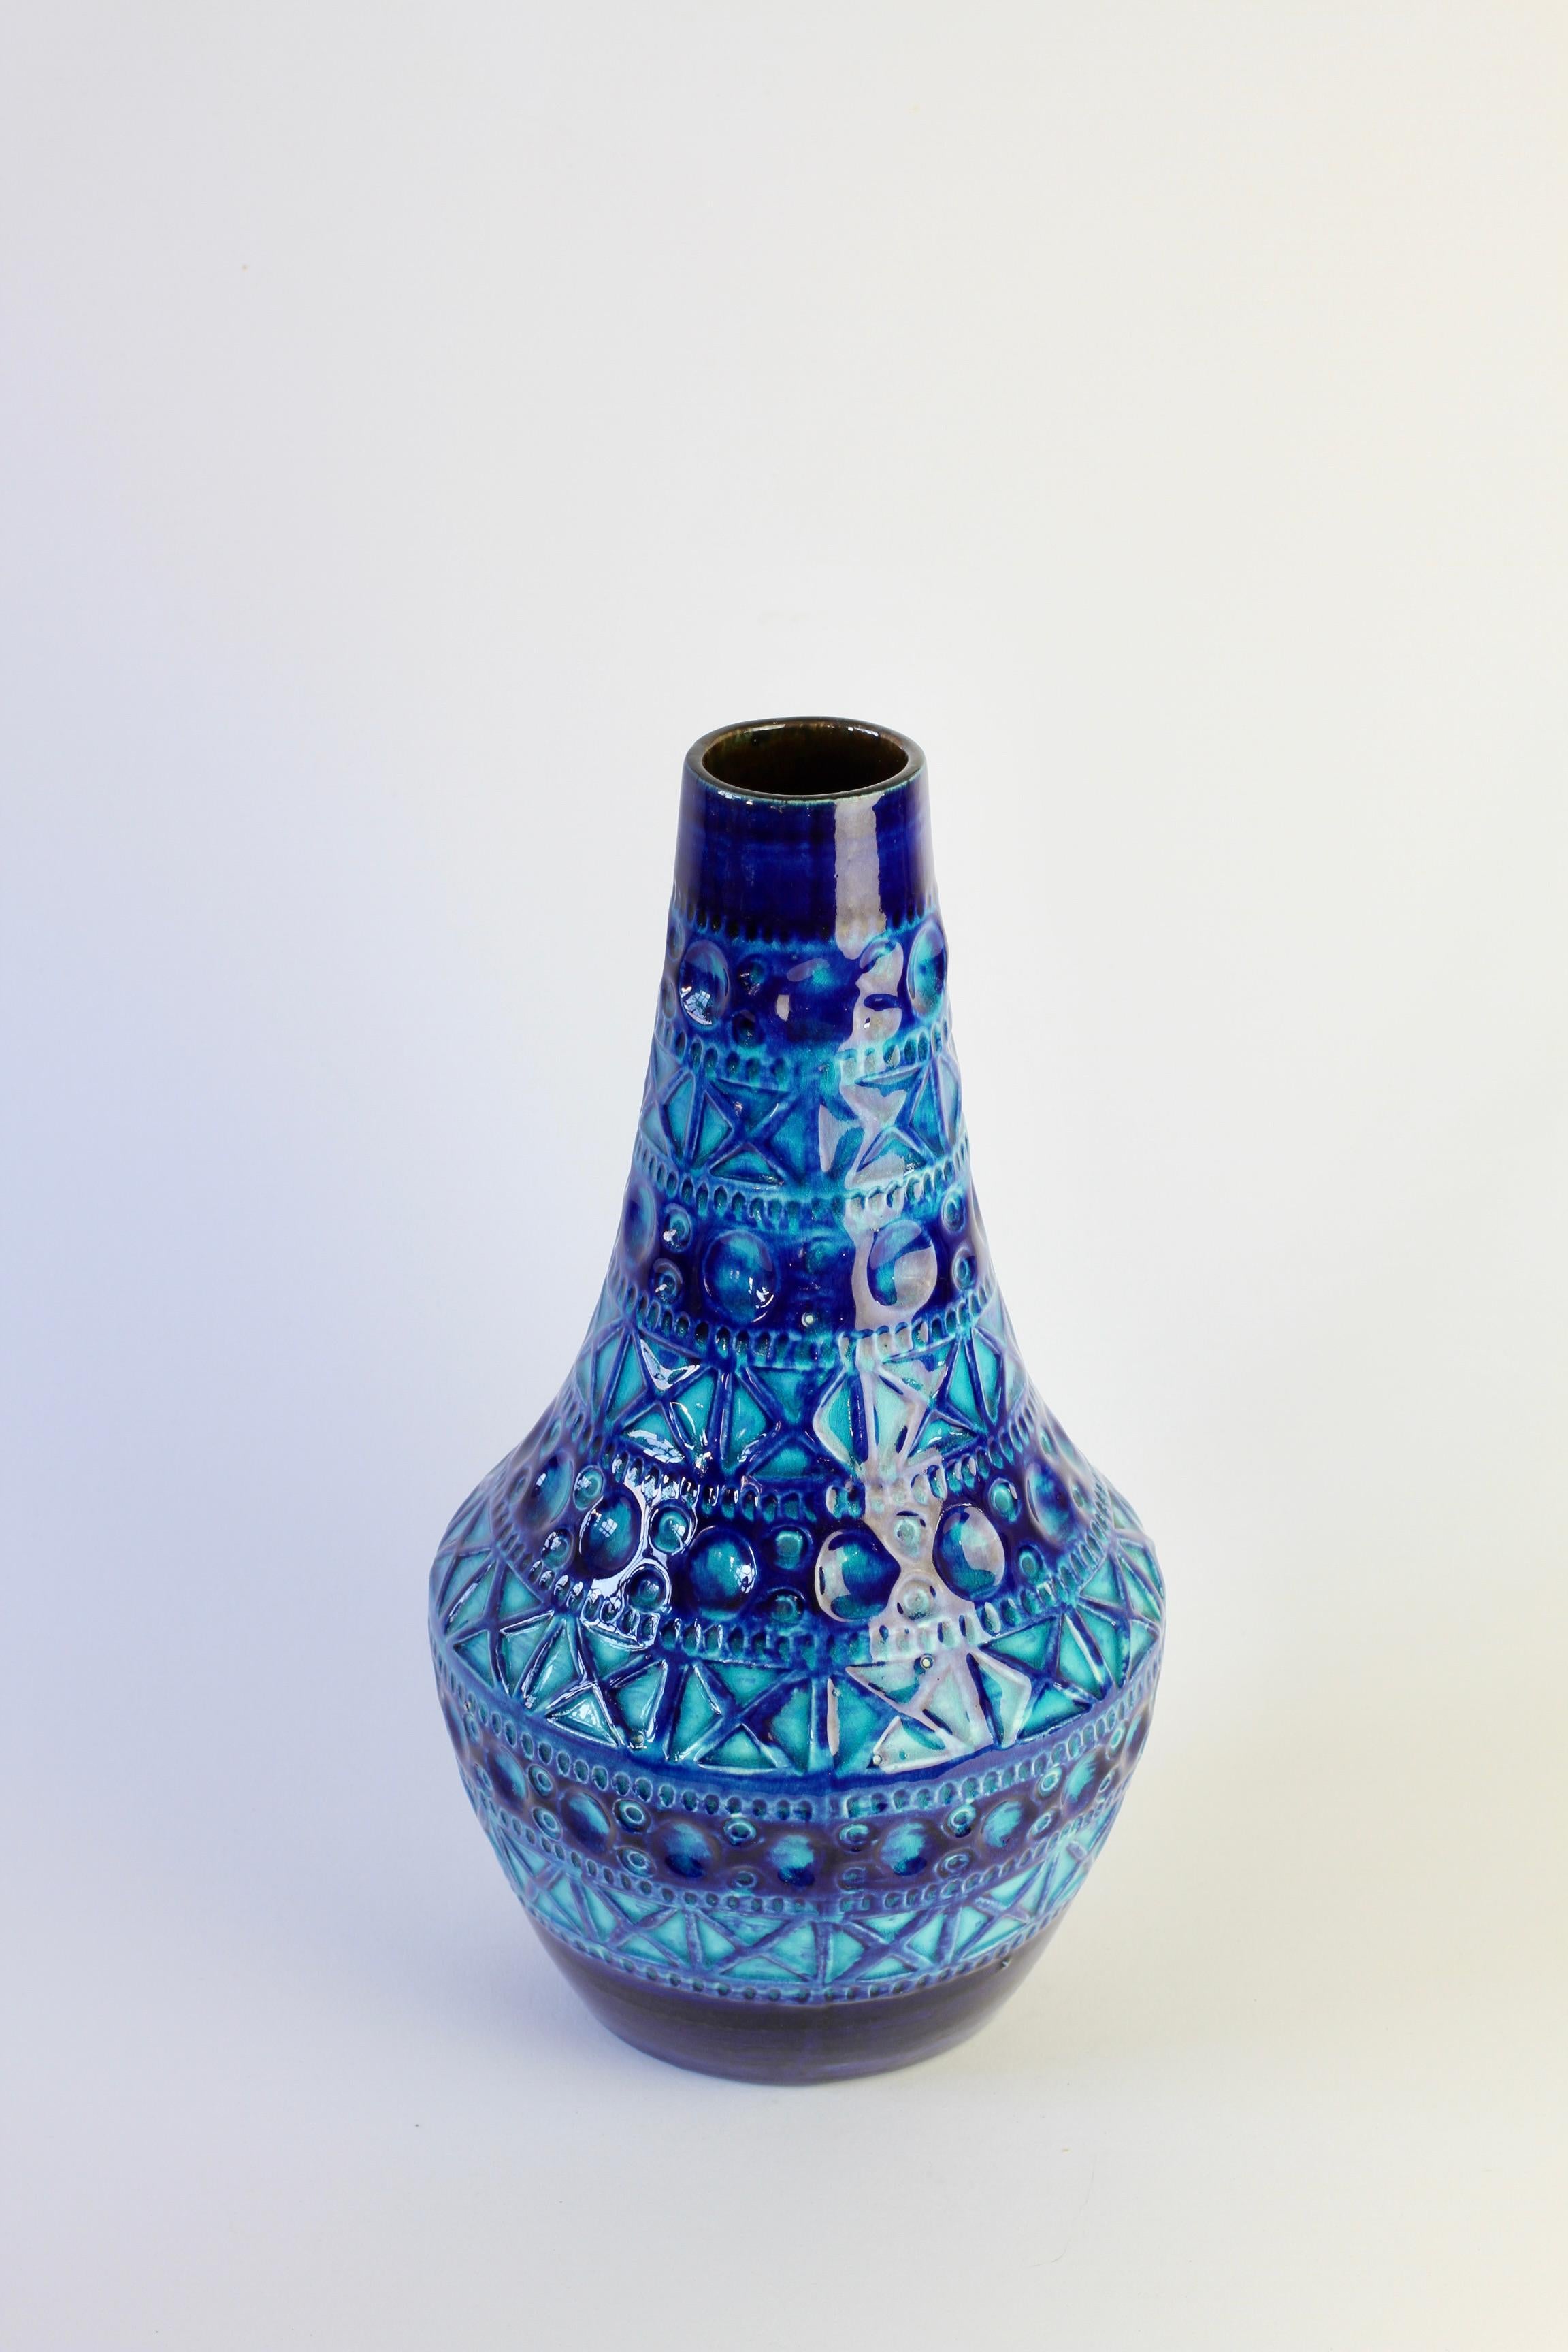 Vintage West German Bitossi Style Vase by Bodo Mans for Bay Pottery, circa 1970 For Sale 6